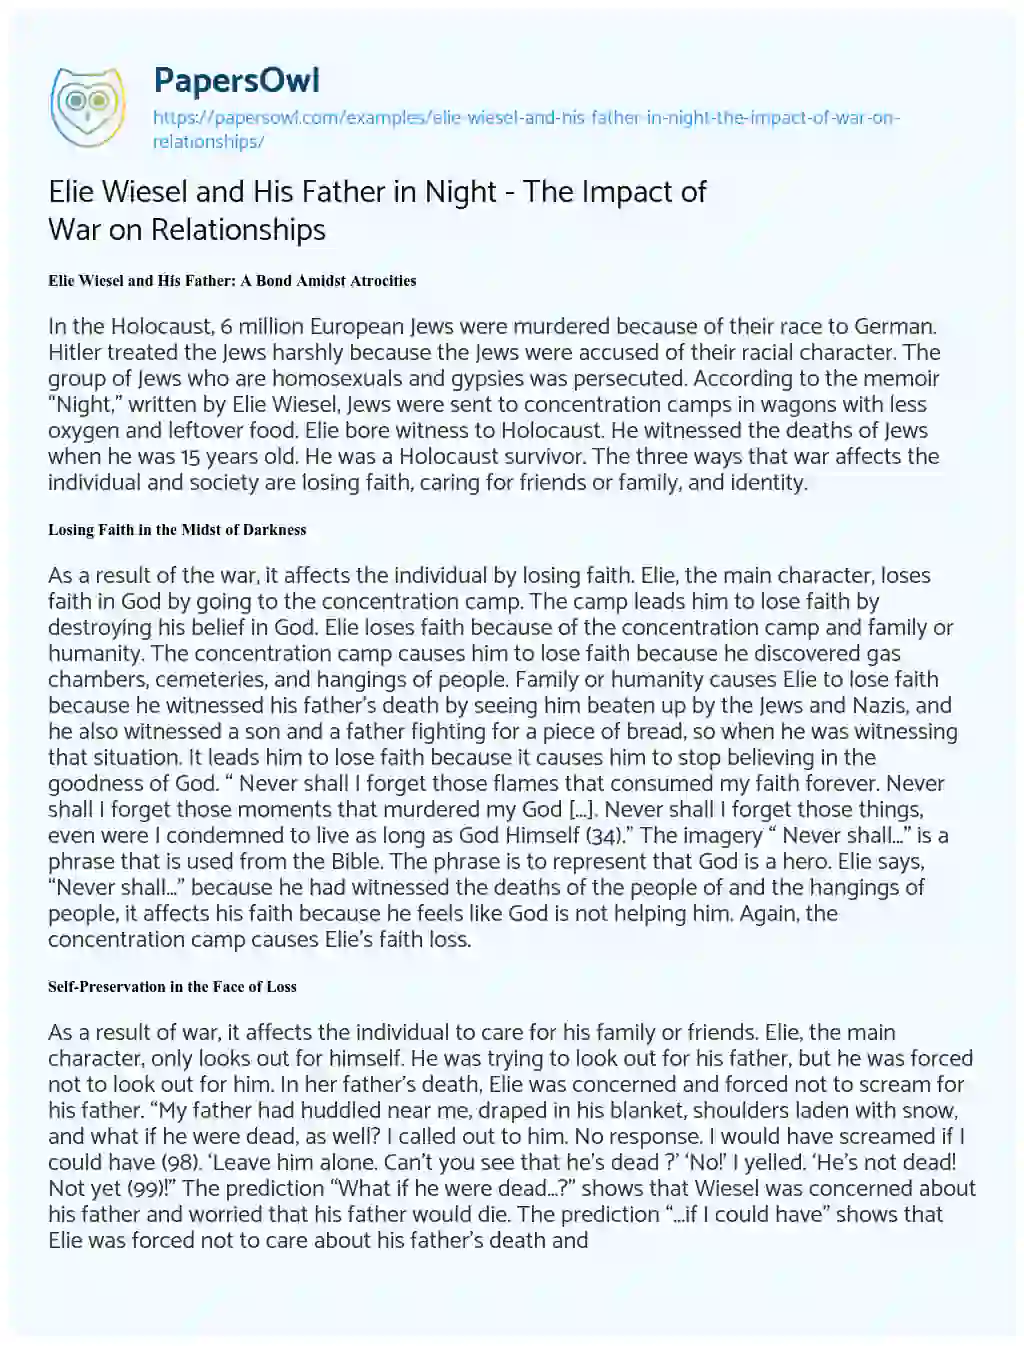 Essay on Elie Wiesel and his Father in Night – the Impact of War on Relationships